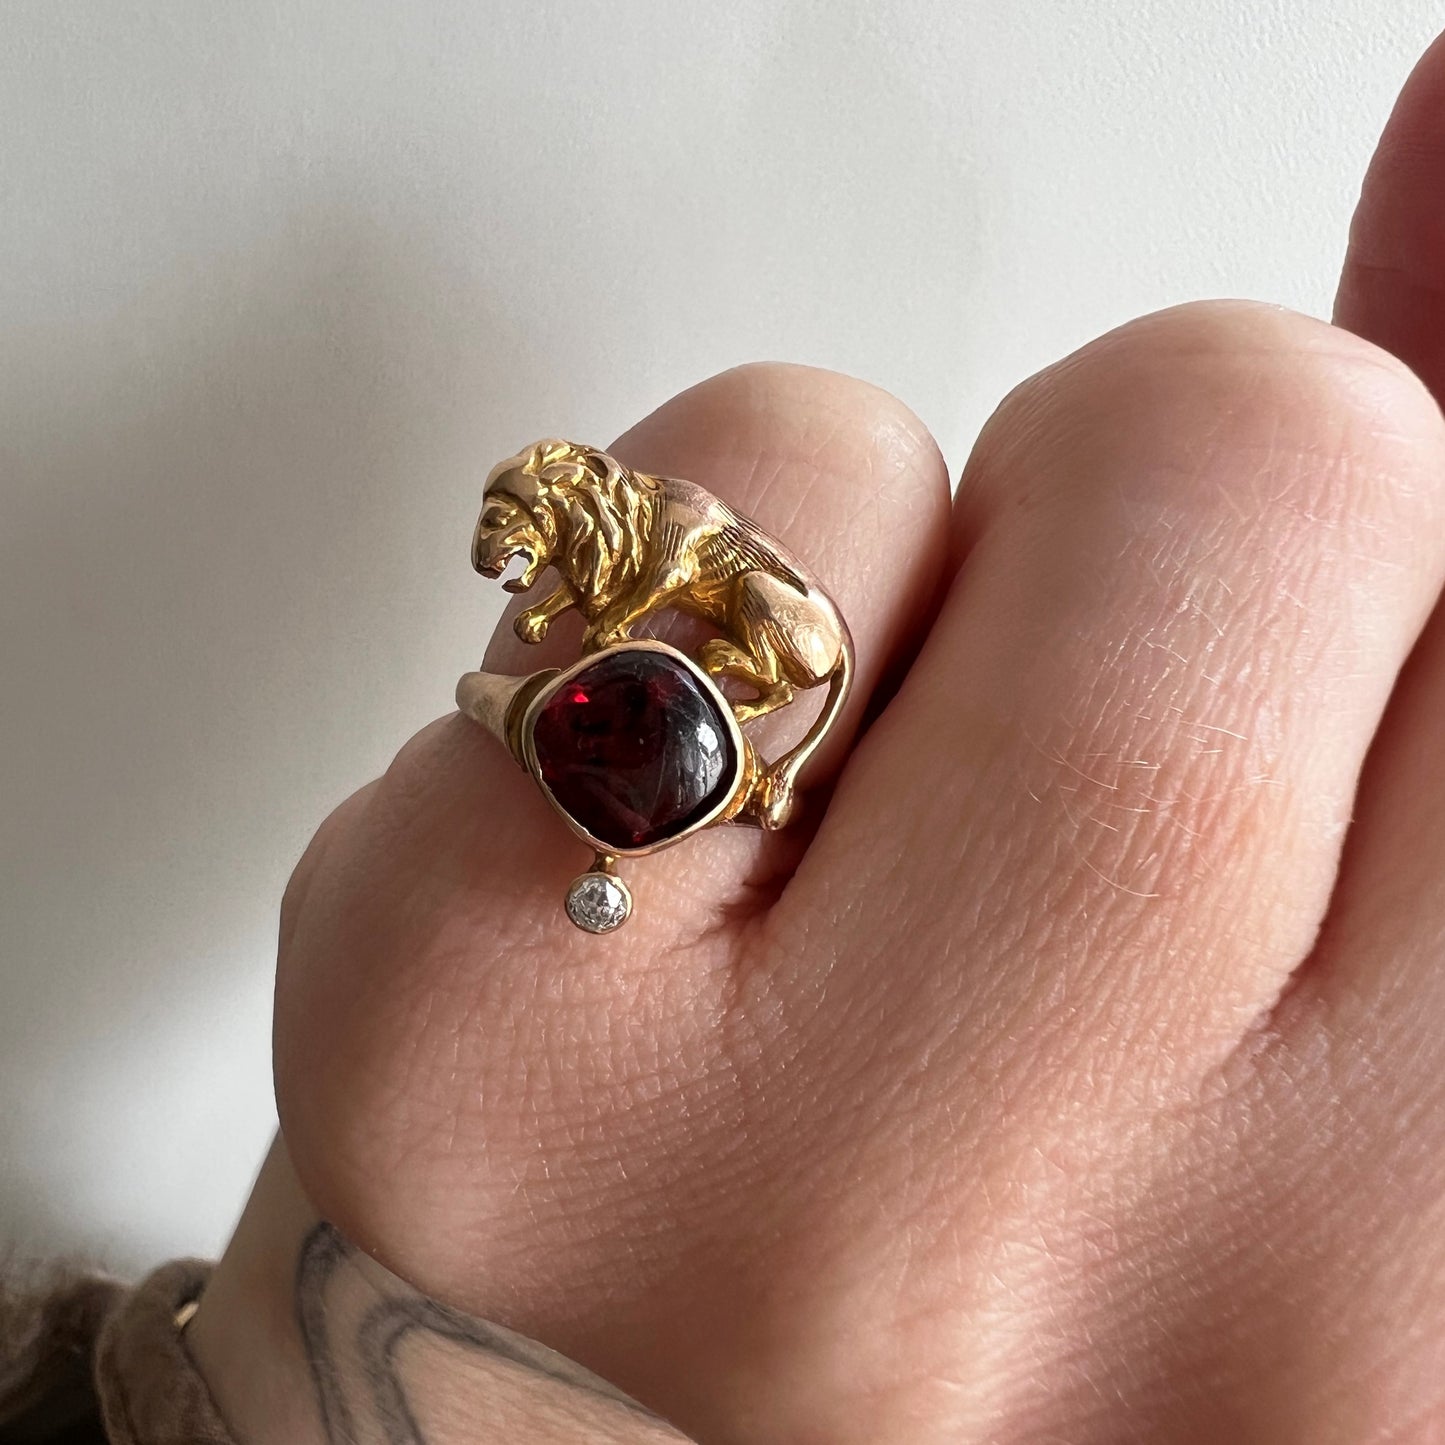 reimagined A N T I Q U E // garnet boulder / antique conversion ring in 14k yellow and rose gold with garnet and diamond / size 2.75 to 3